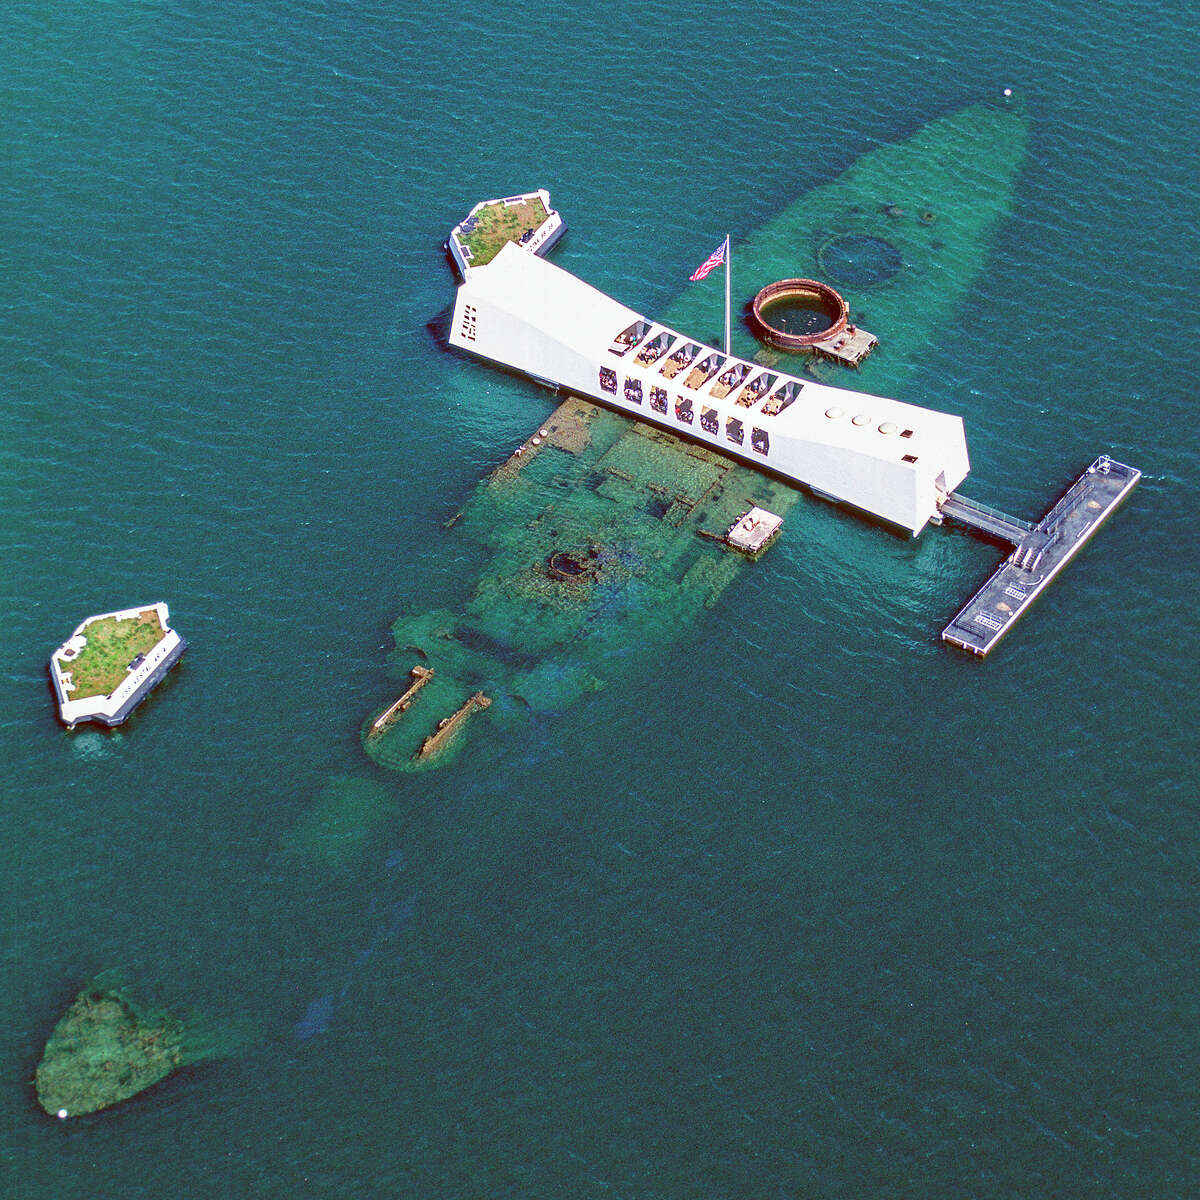 The USS Arizona Memorial in Oahu, Honolulu, Hawaii, is the resting place of 1,102 of the 1,177 sailors and Marines killed on the USS Arizona during the attack on Pearl Harbor on Dec. 7, 1941, and commemorates the events of that day.